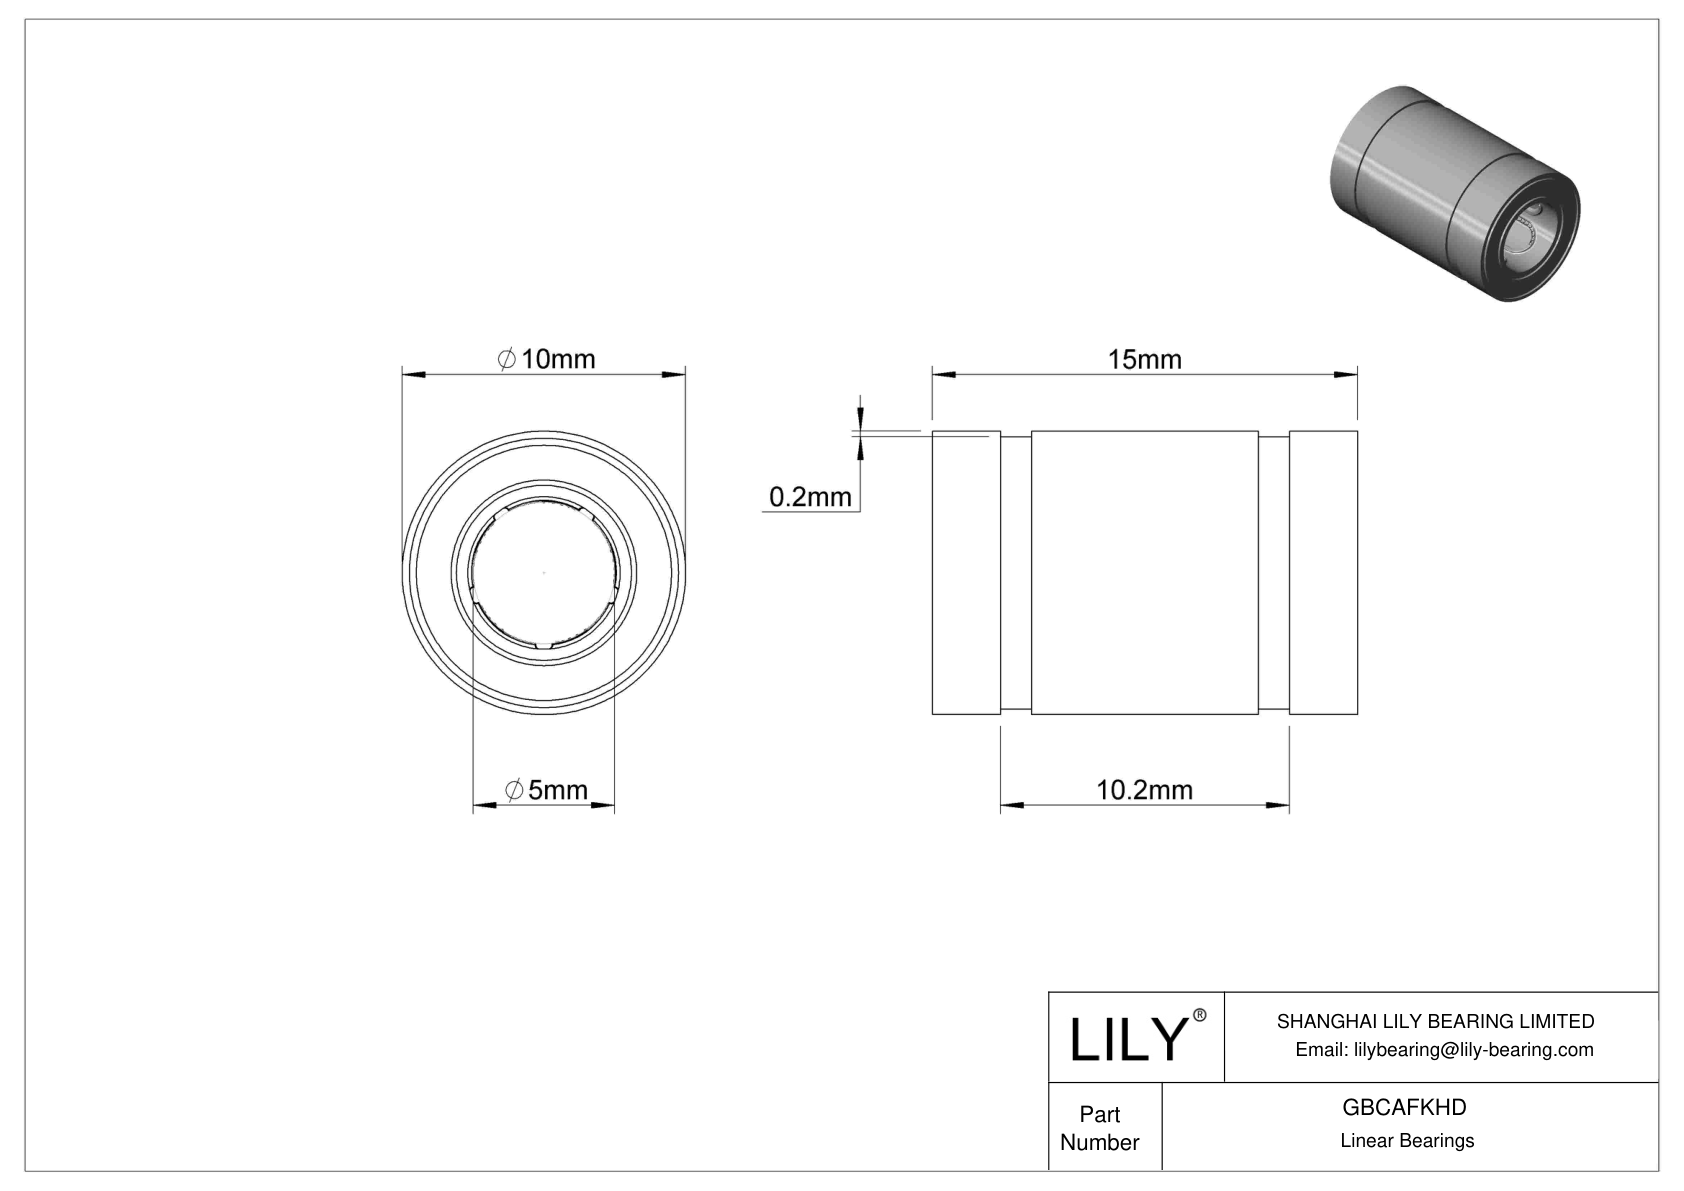 GBCAFKHD Common Linear Ball Bearings cad drawing